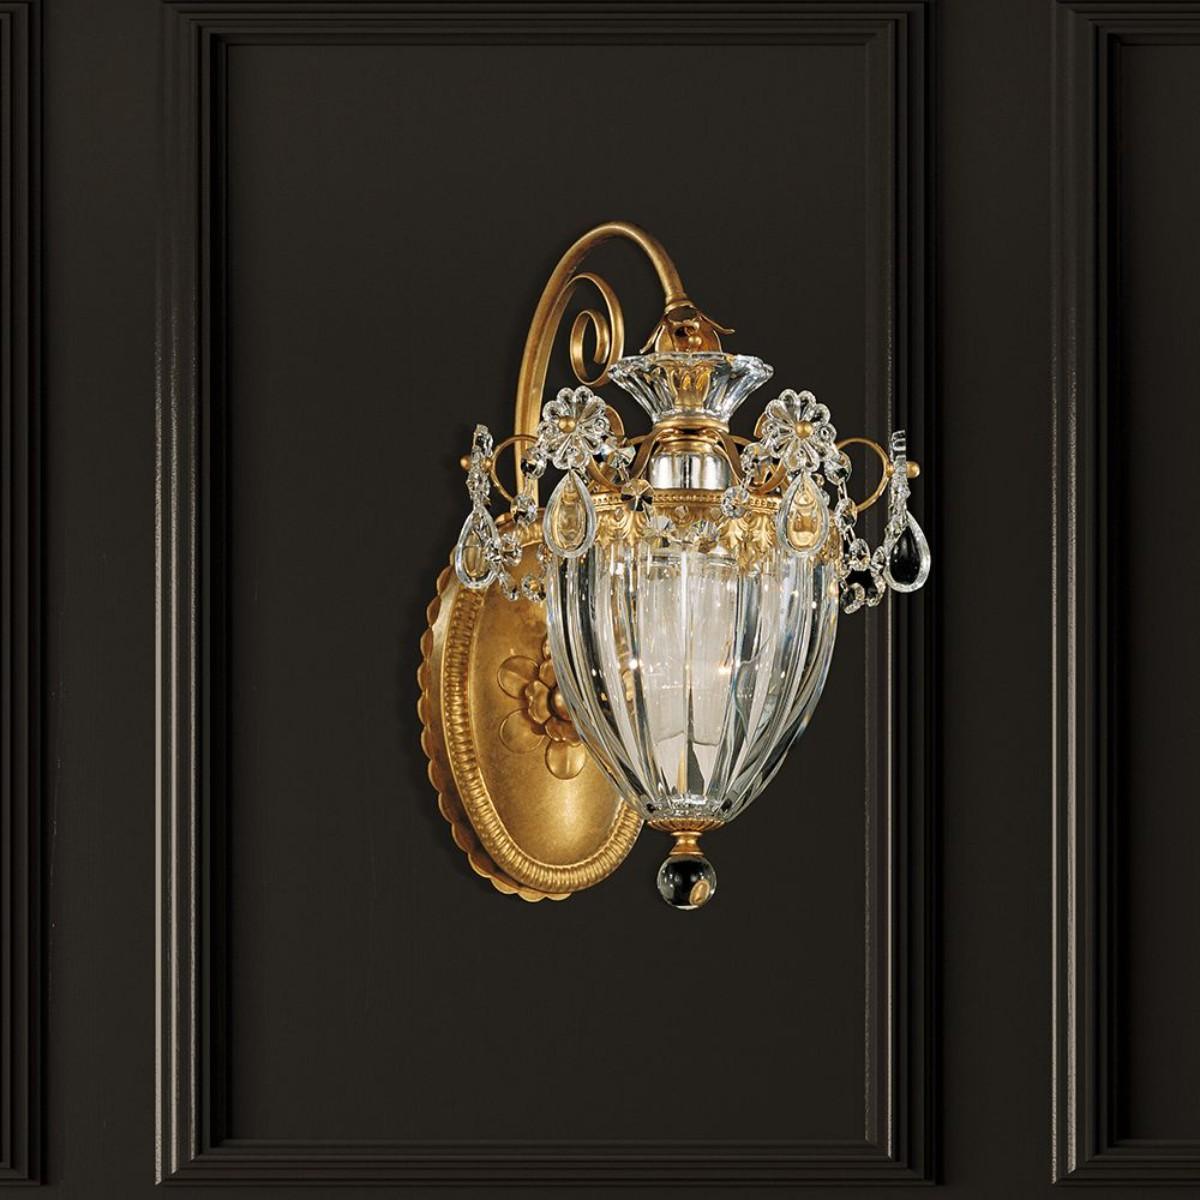 Bagatelle 13 inch Armed Sconce